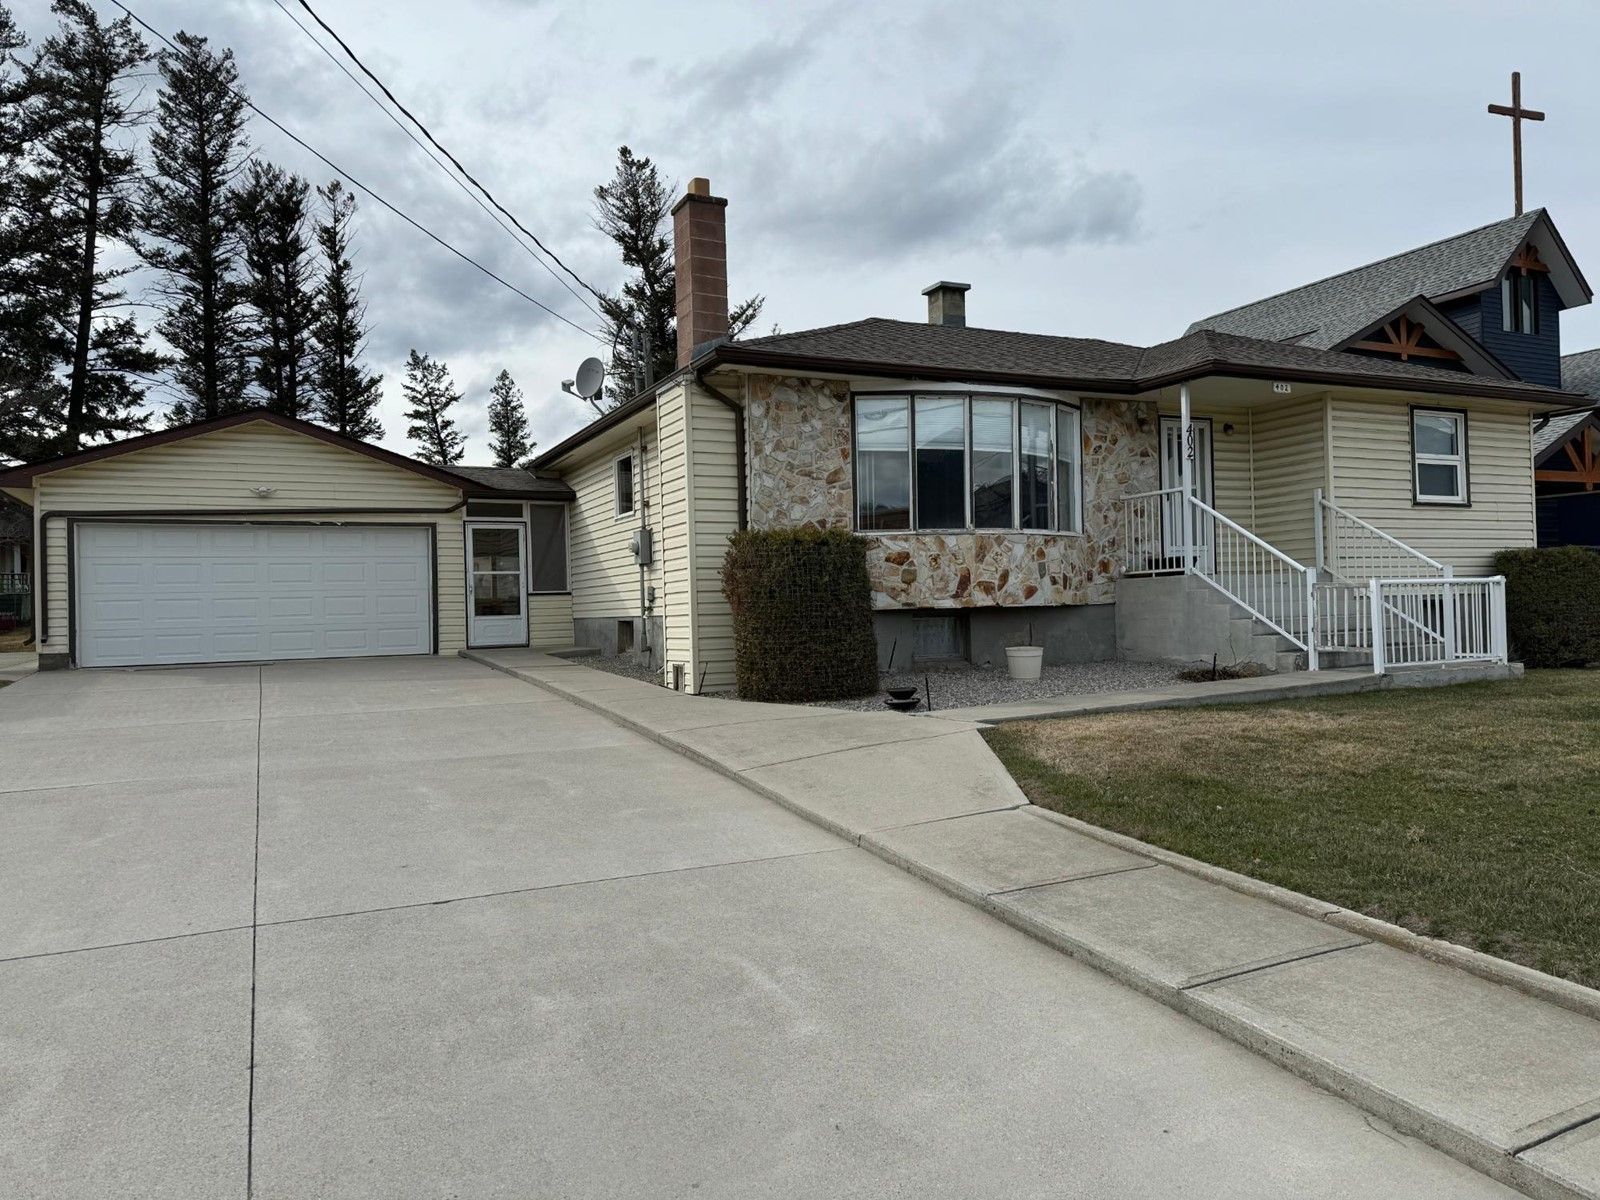 New property listed in Invermere